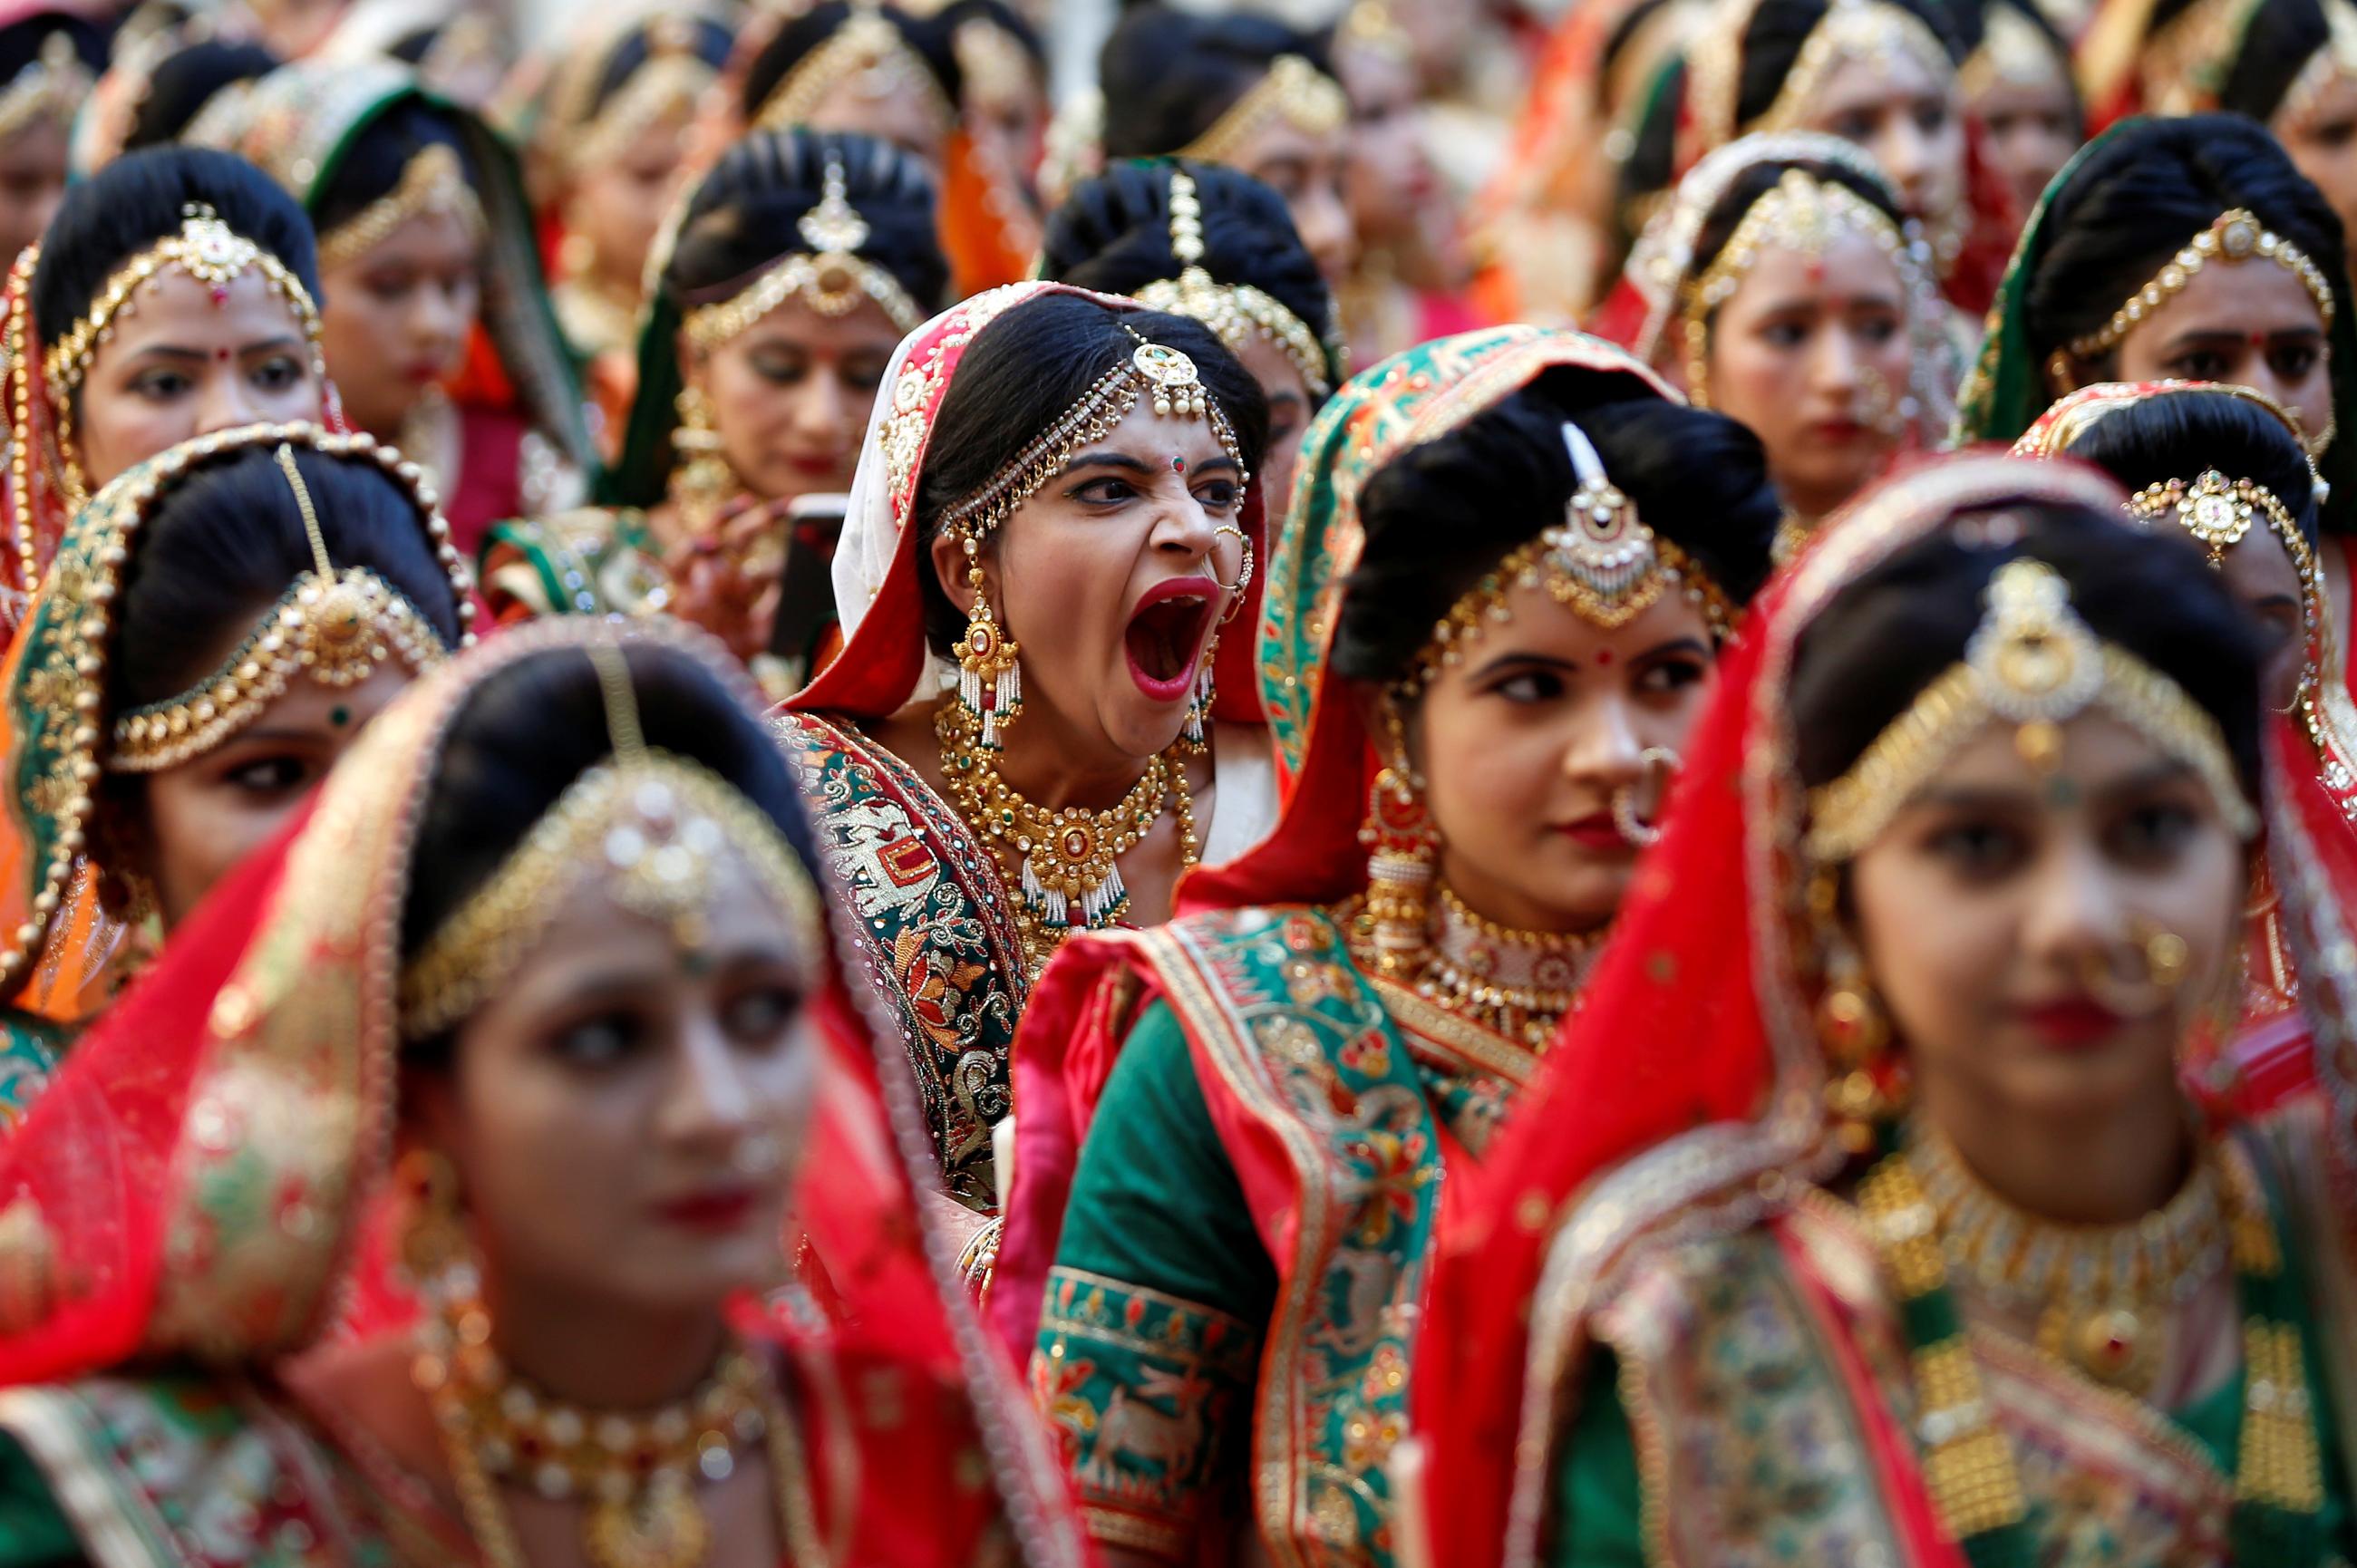 A bride yawns as she and others wait to take their wedding vows during a mass marriage ceremony, organized by a diamond merchant, in which 261 including six Muslim and three Christian couples took their wedding vows, in Surat, Gujarat, India, December 23, 2018.